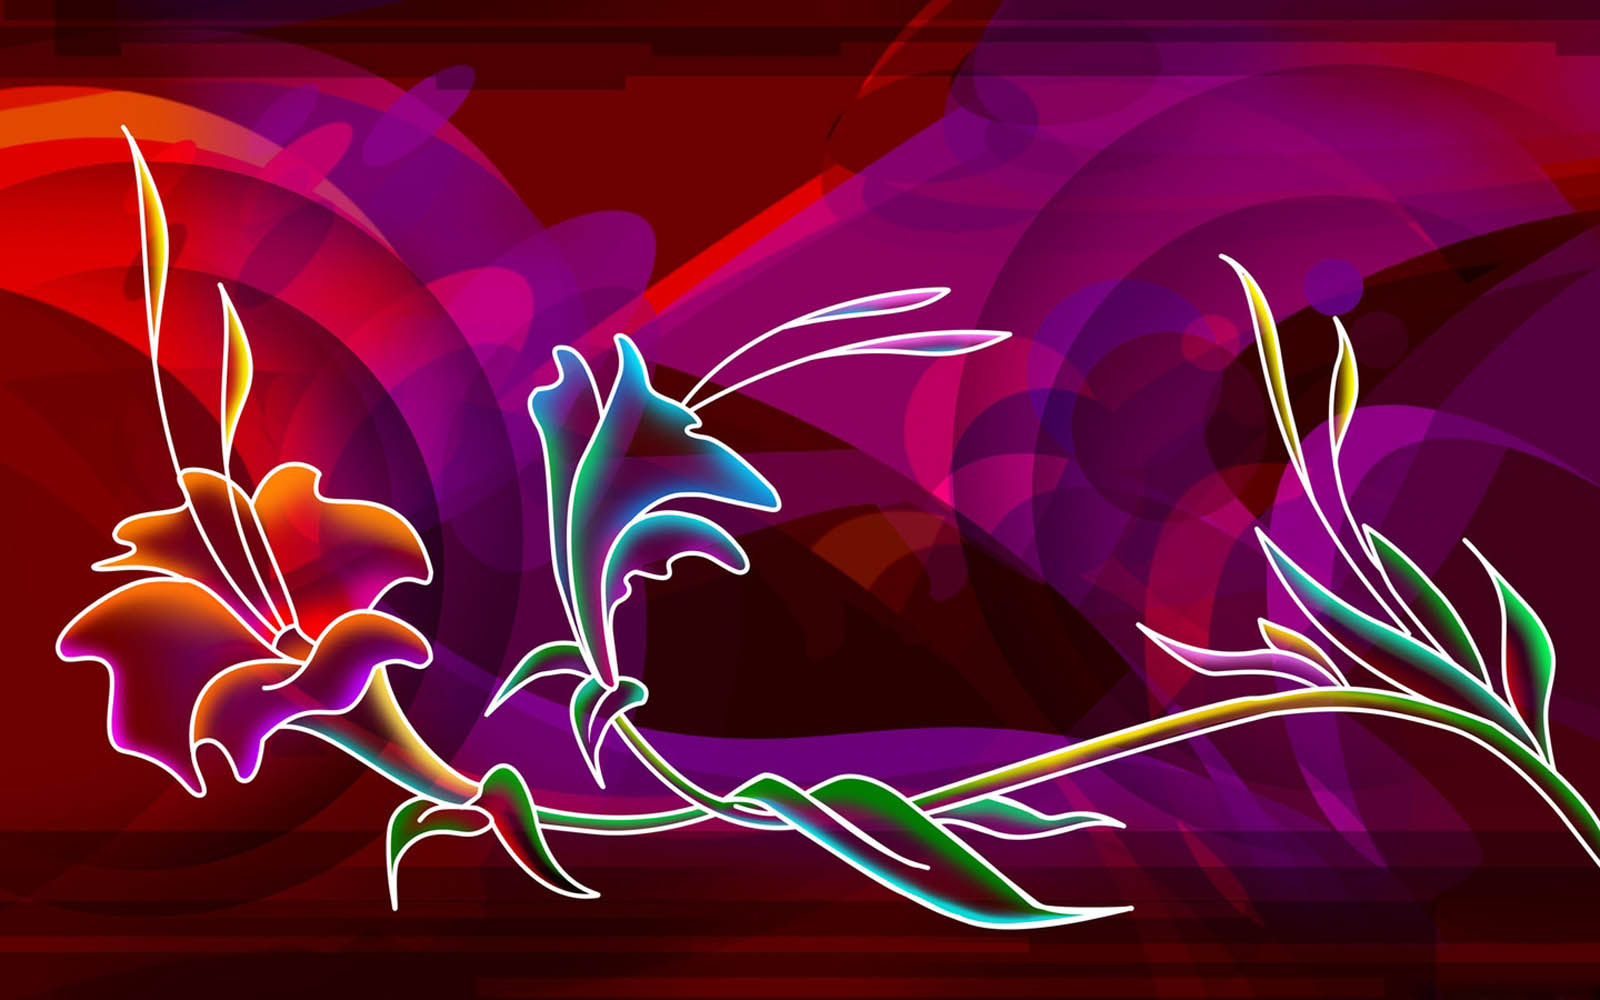 Tag Neon Art Wallpapers Backgrounds Photos Images and Pictures for 1600x1000